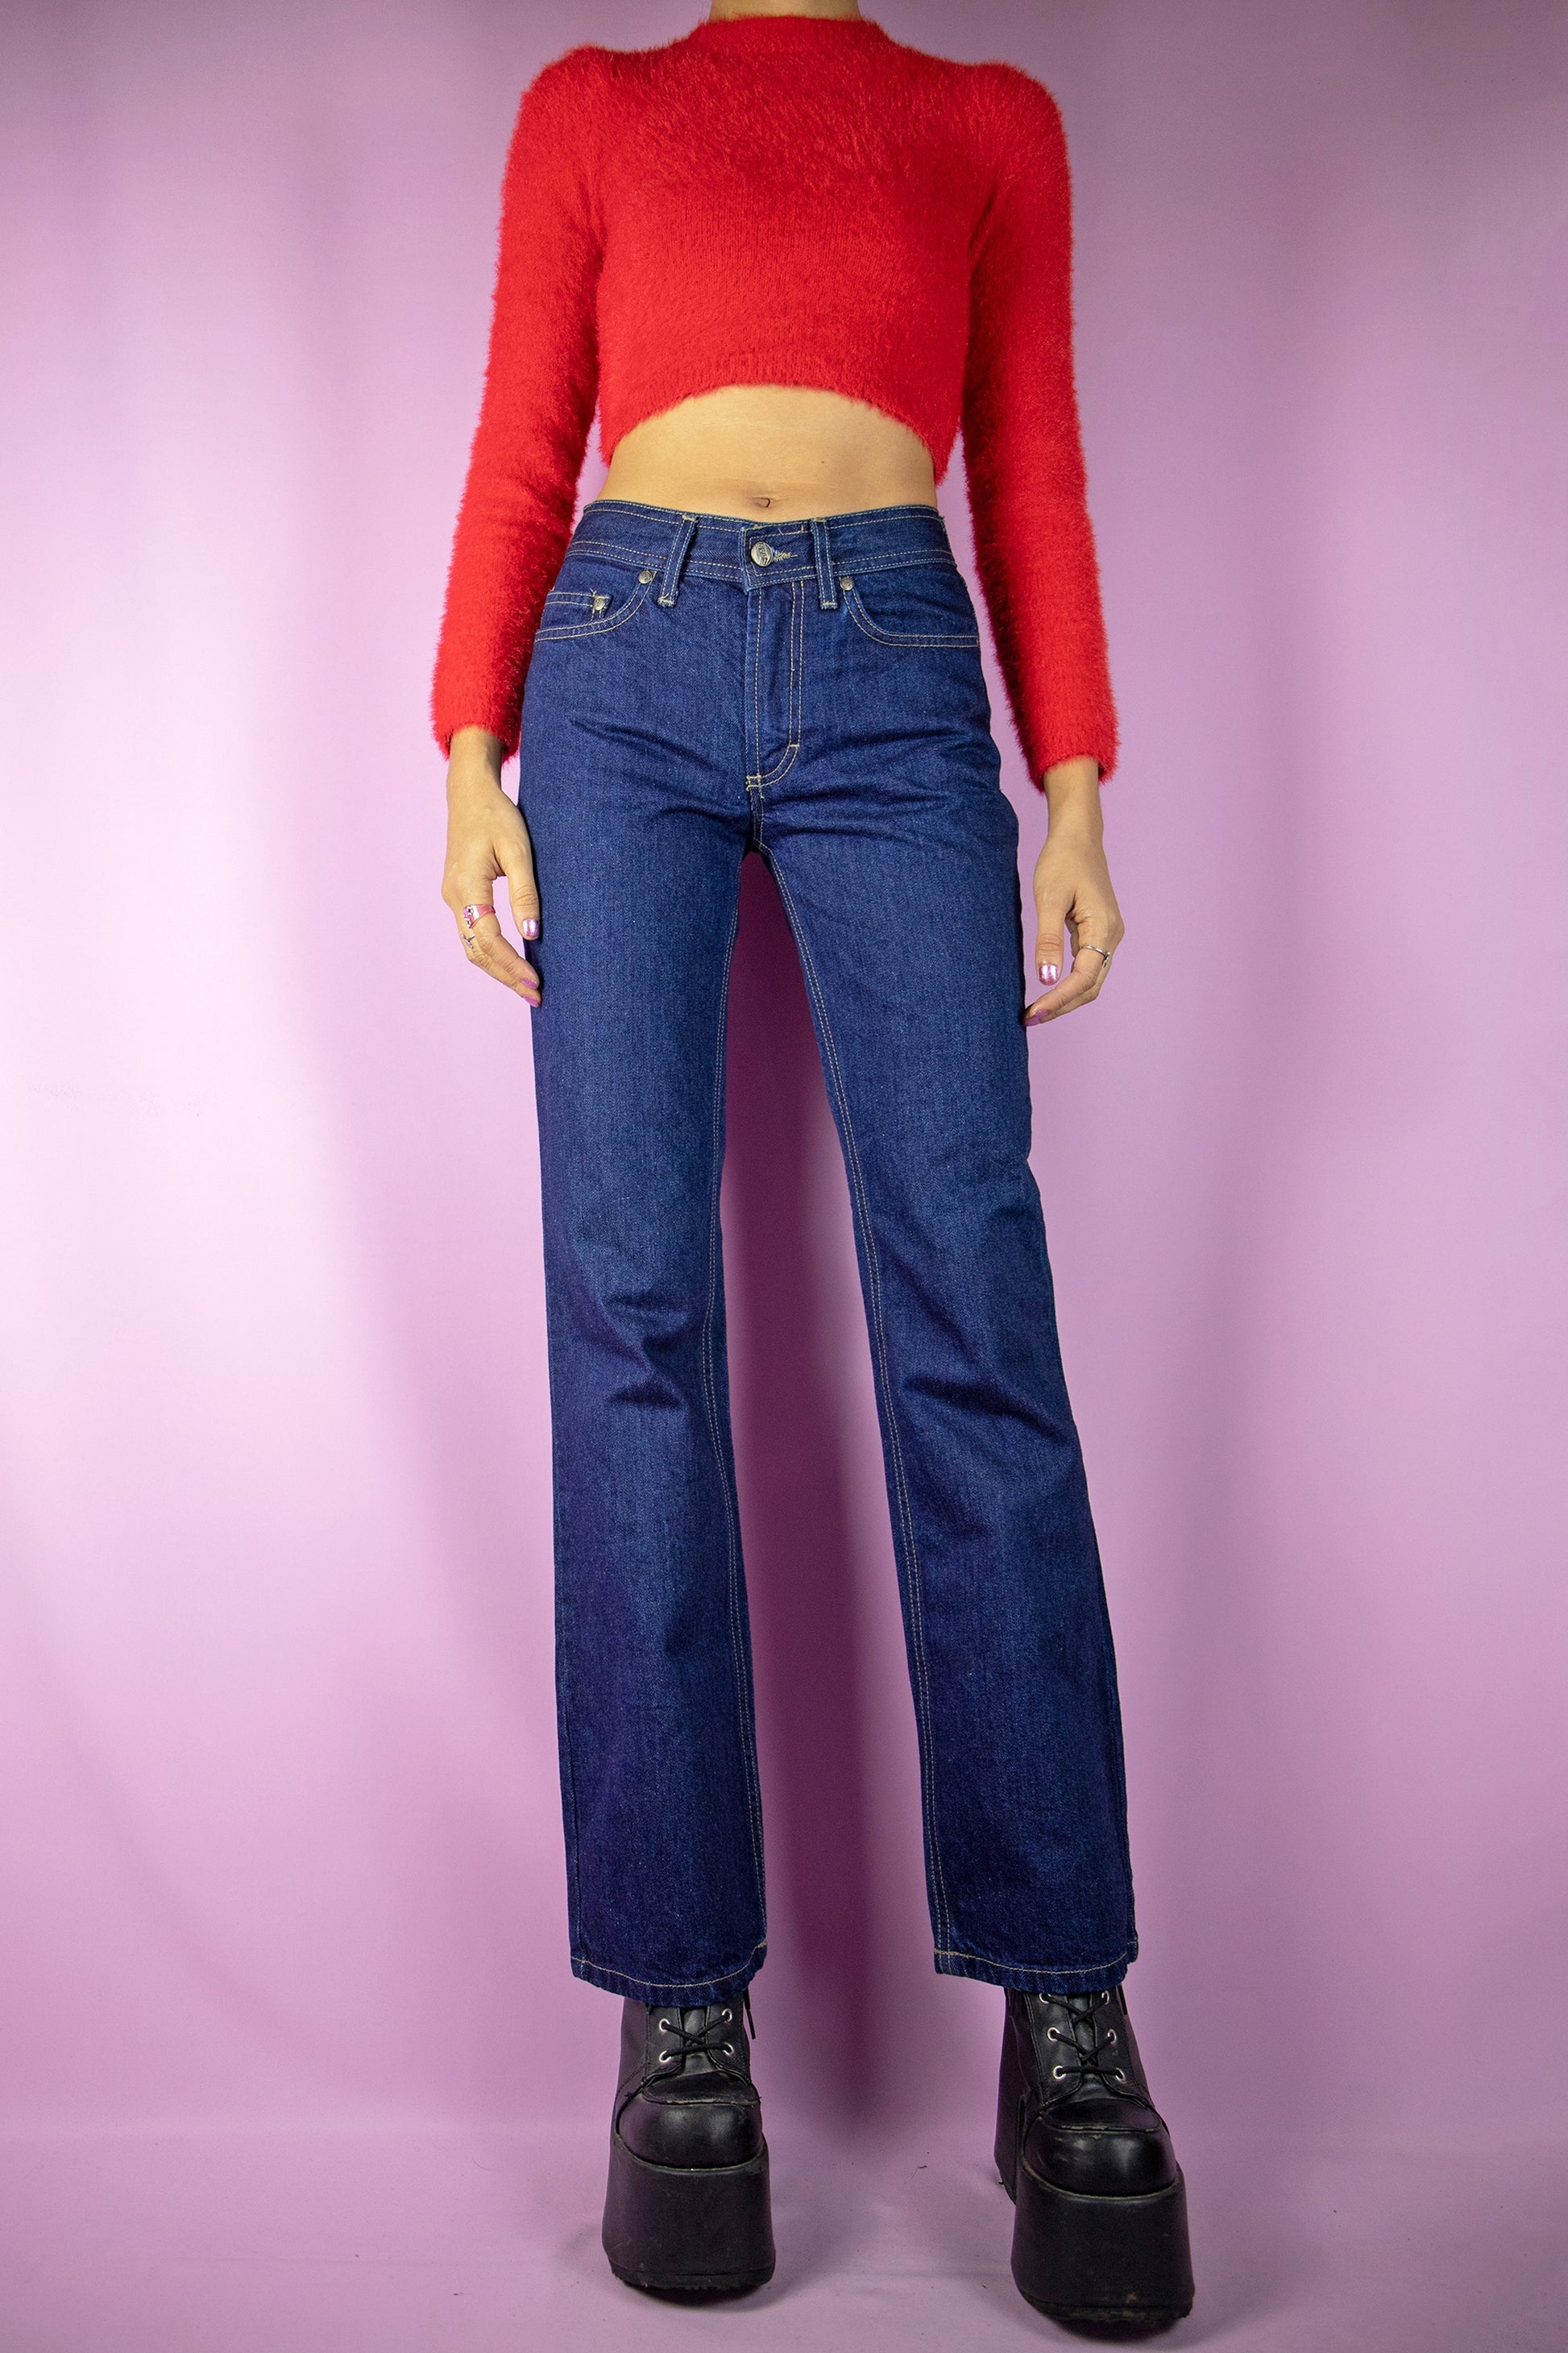 The Vintage 90s Mid Rise Bootcut Jeans are mid-rise straight-leg pants with pockets. Classic retro 1990s casual denim trousers.